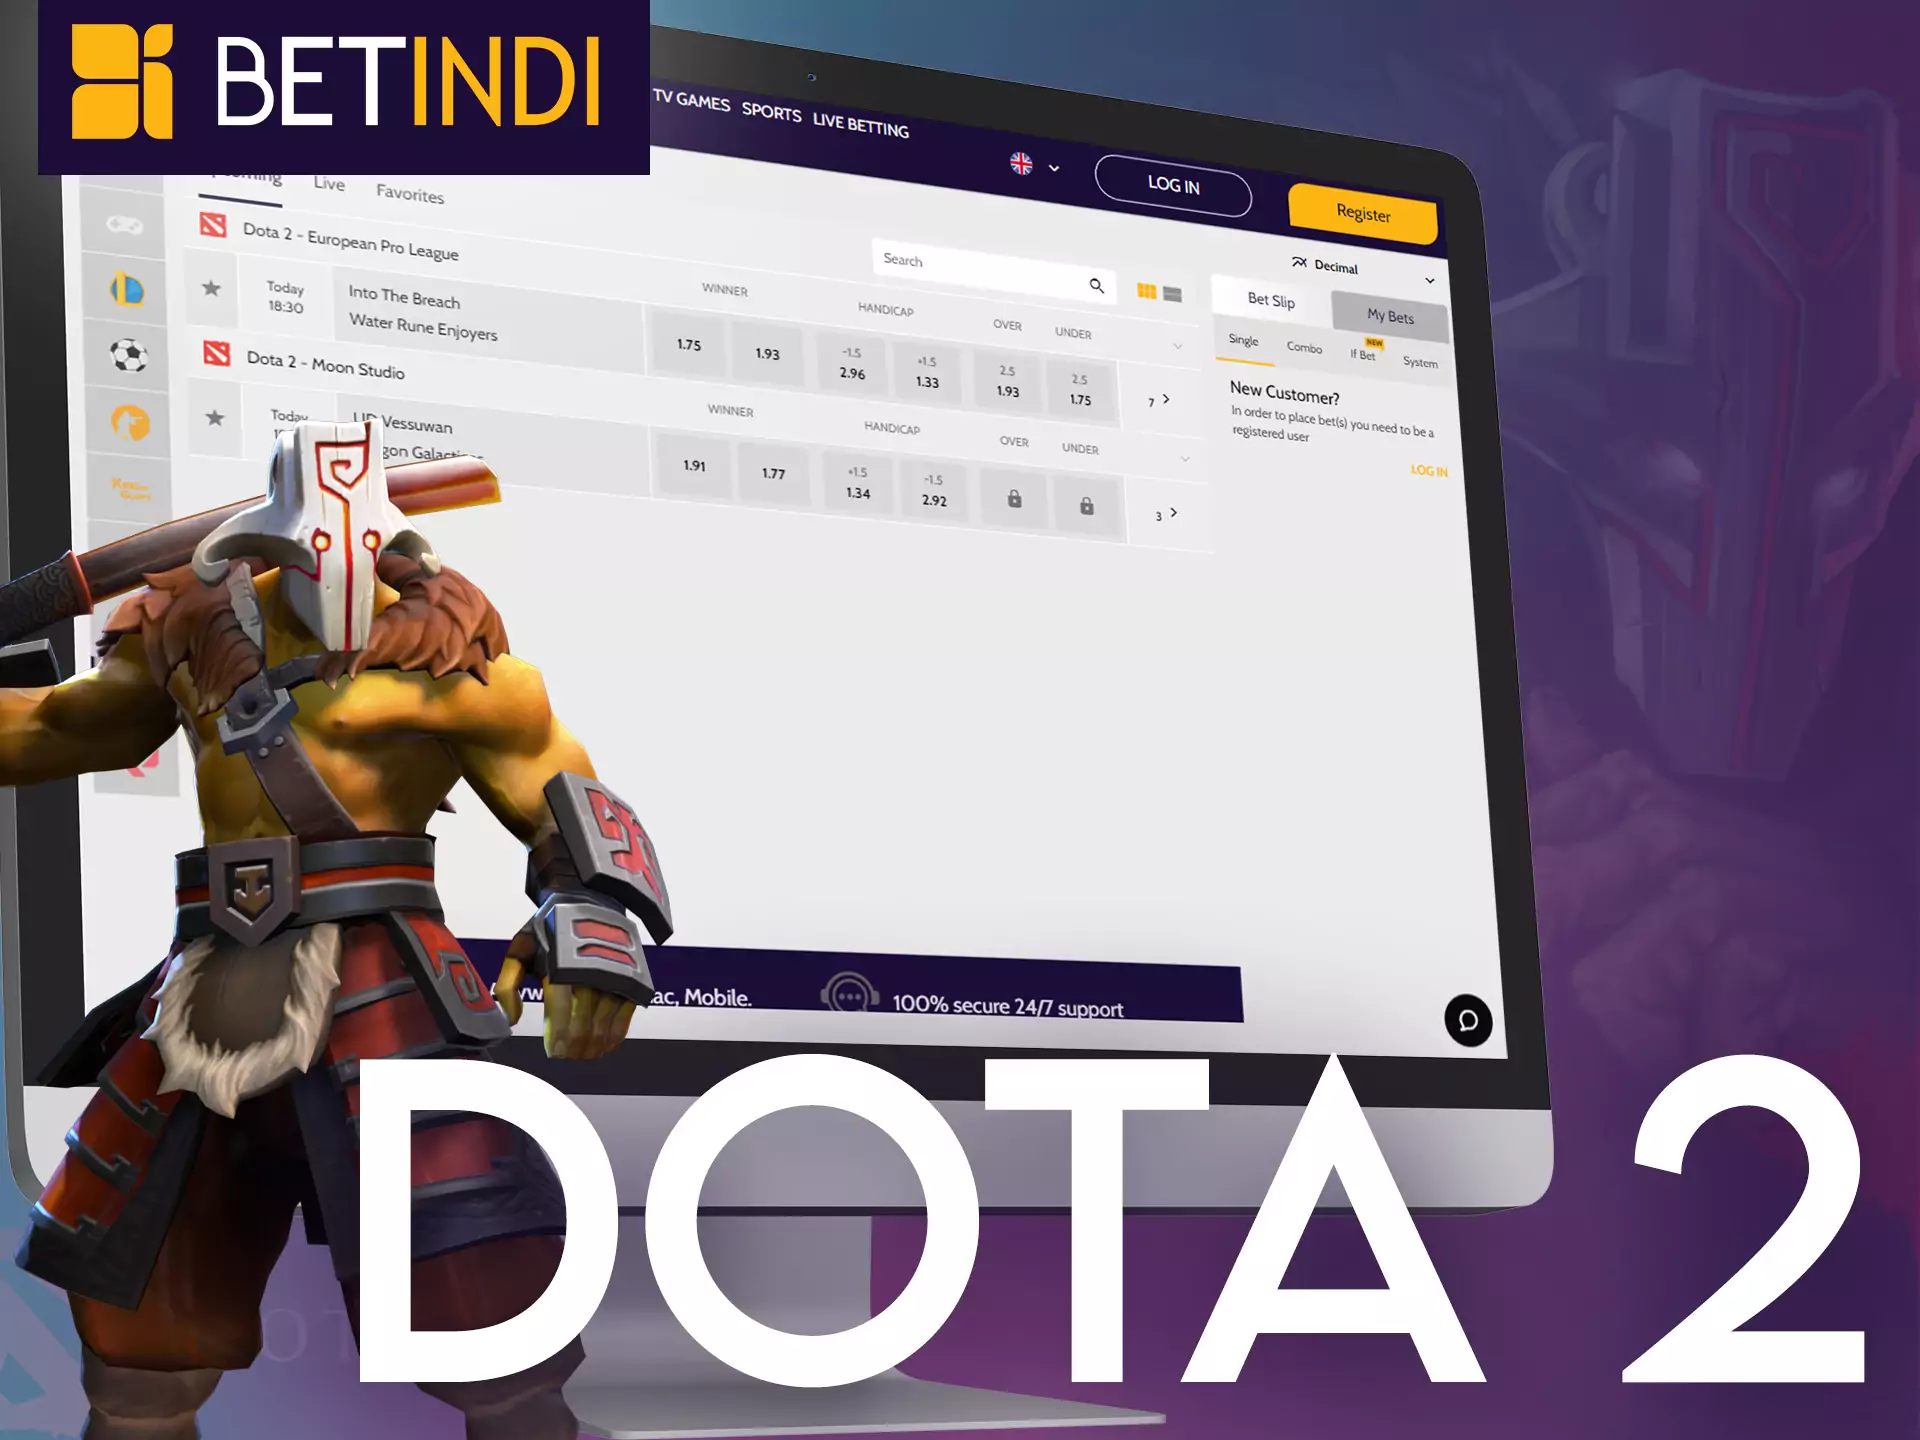 Place bets on esports Dota 2 with Betindi and enjoy the game.